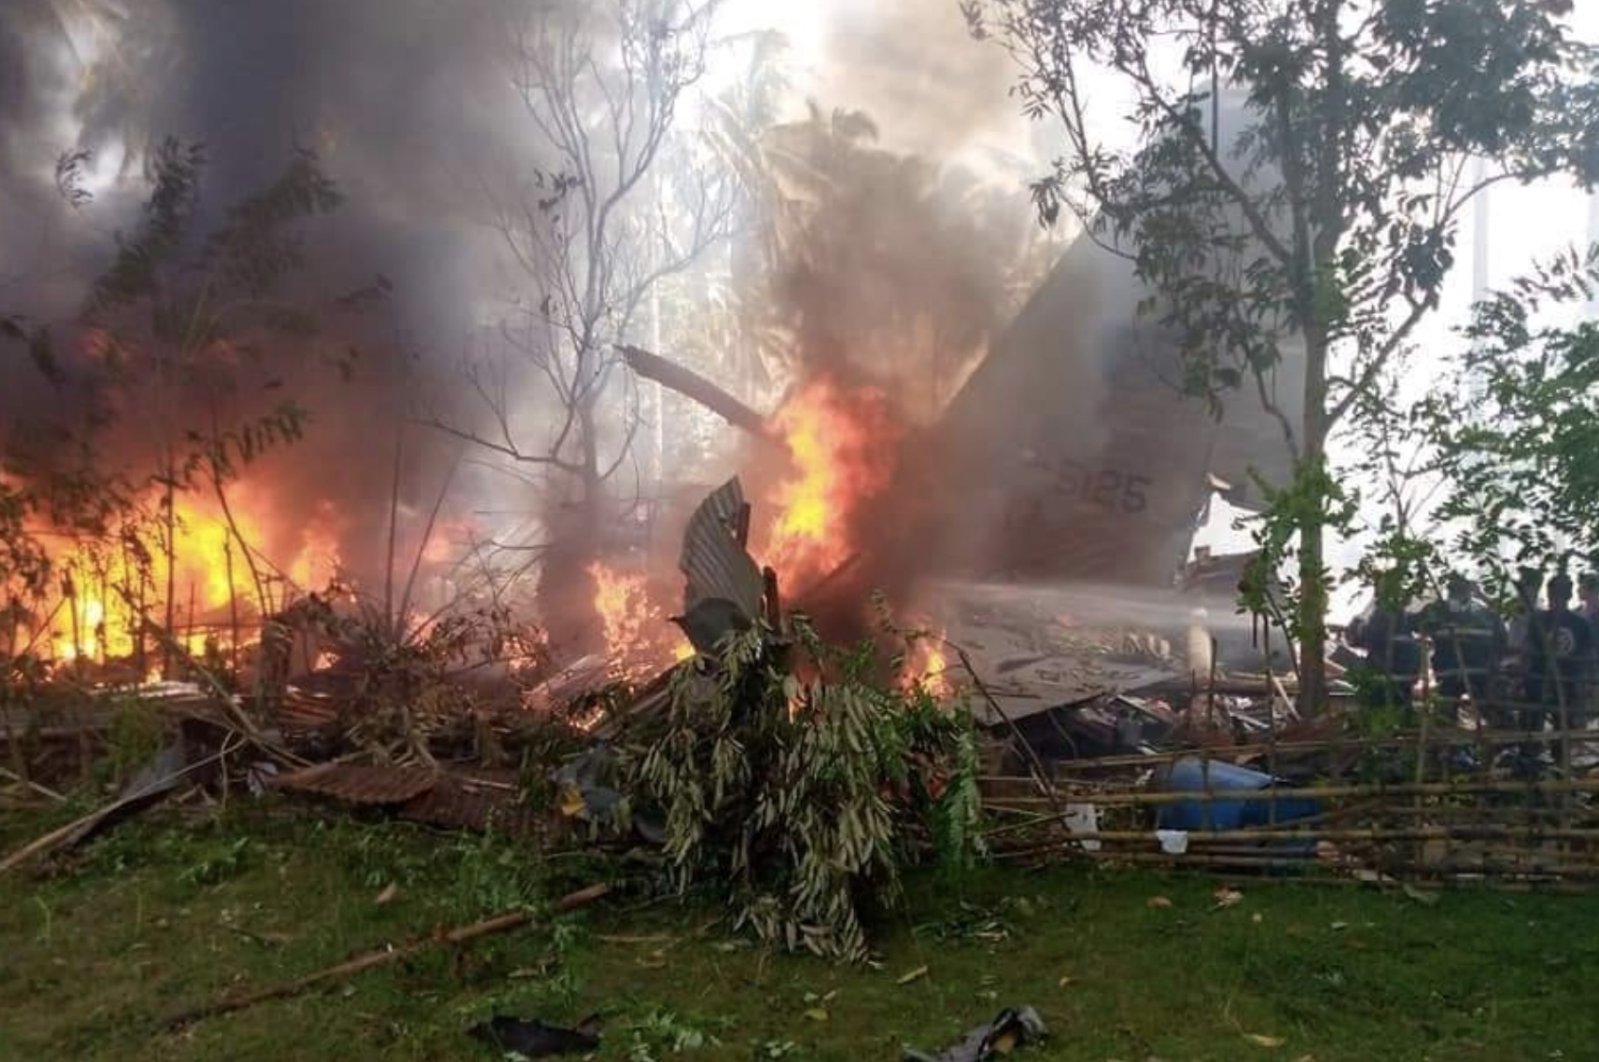 31 dead, 17 missing as military plane crashes in Philippines | Daily Sabah